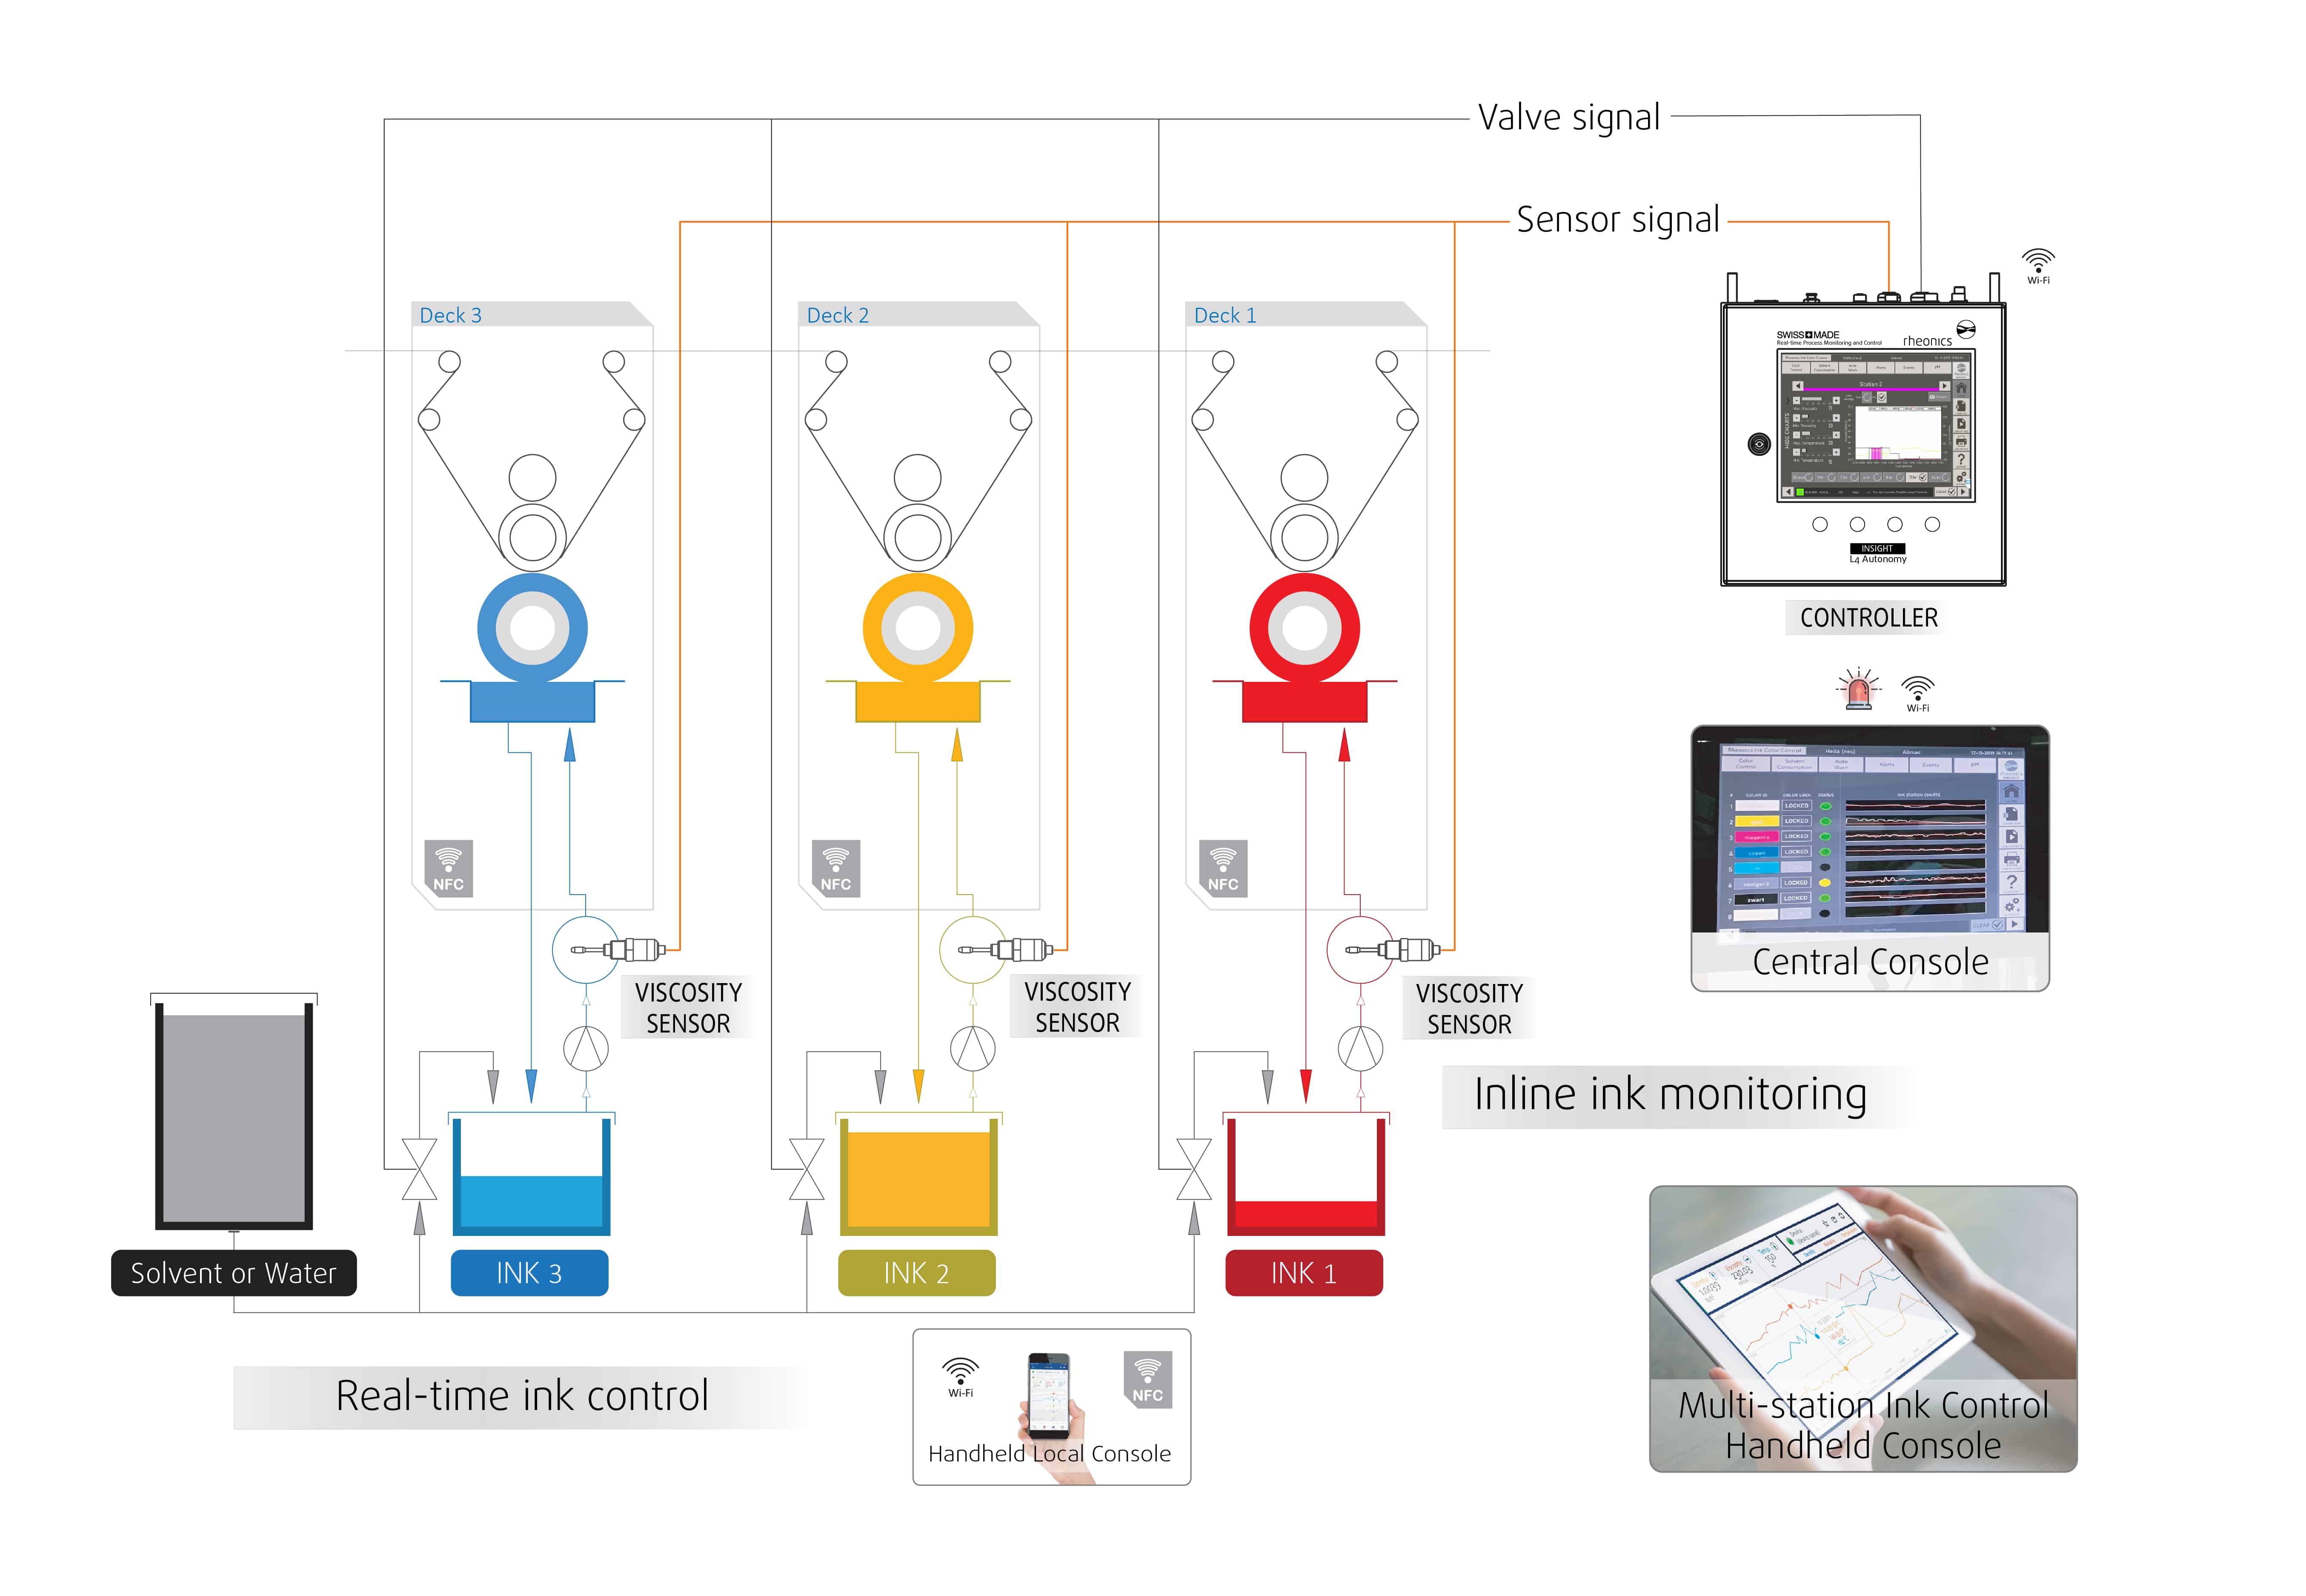 Image 1: Real-time ink control is achieved through inline ink monitoring facilitated by placement of viscosity sensors at each print deck. They connect and transmit data to central, multi-station and single-station handheld consoles.